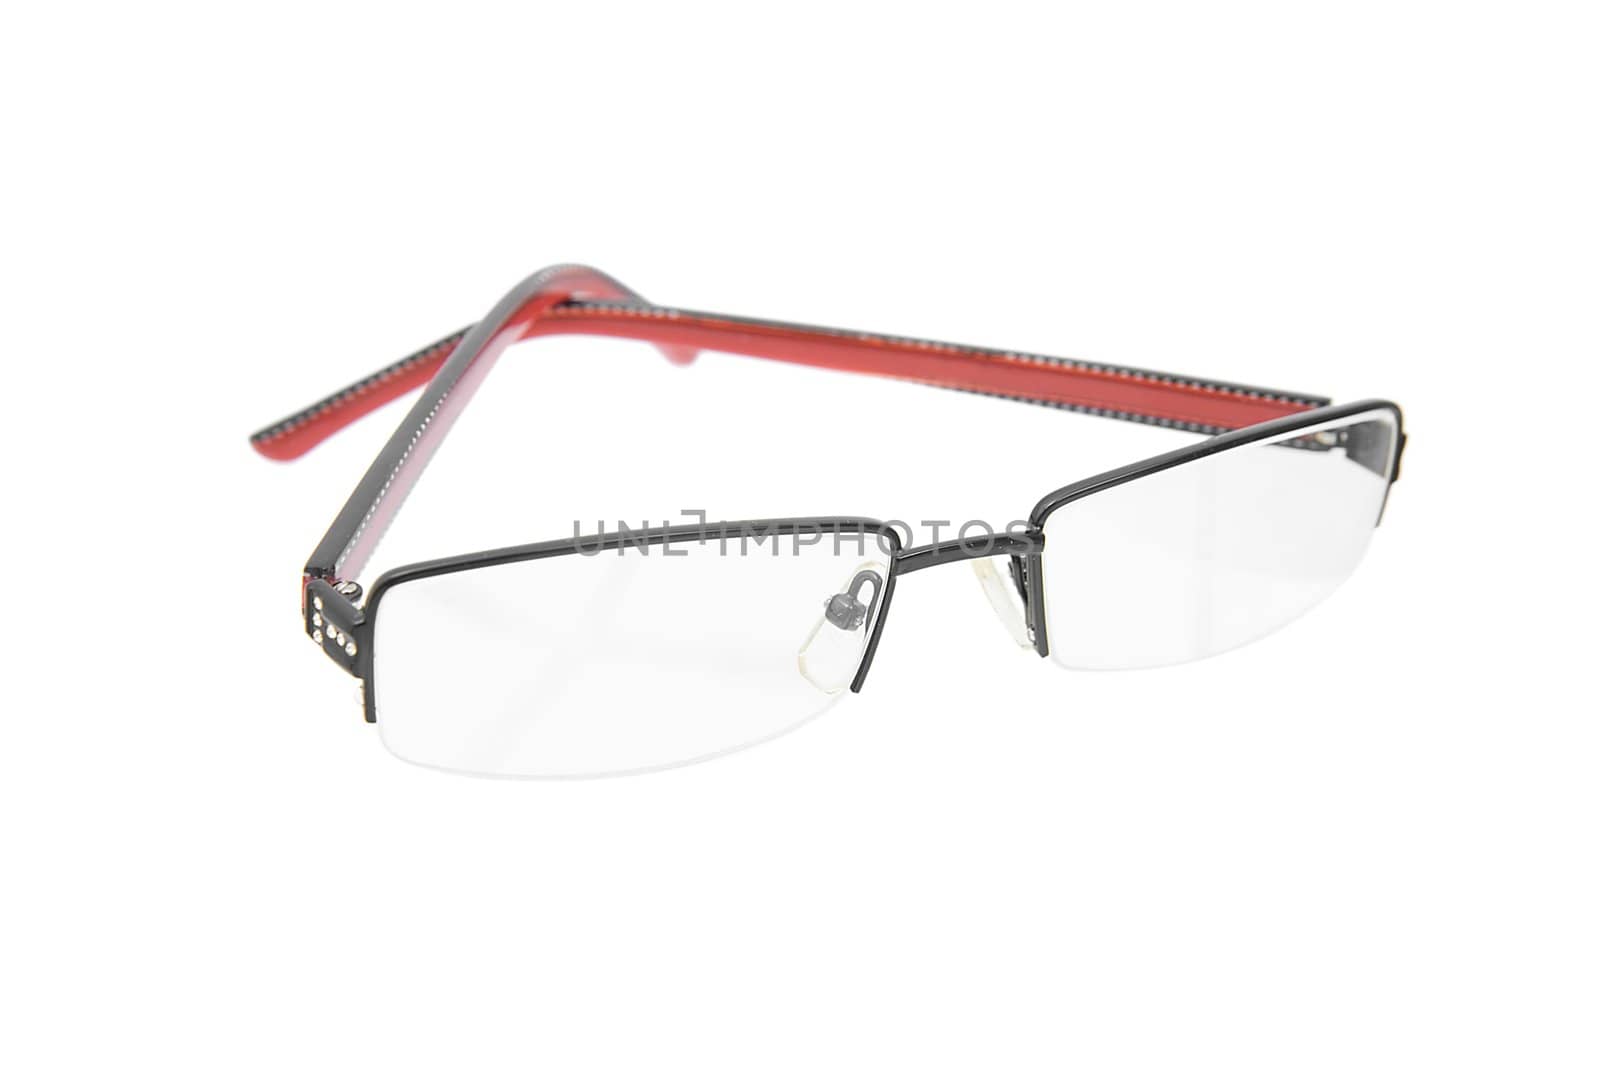 glasses with a red and black frame lie on a white table